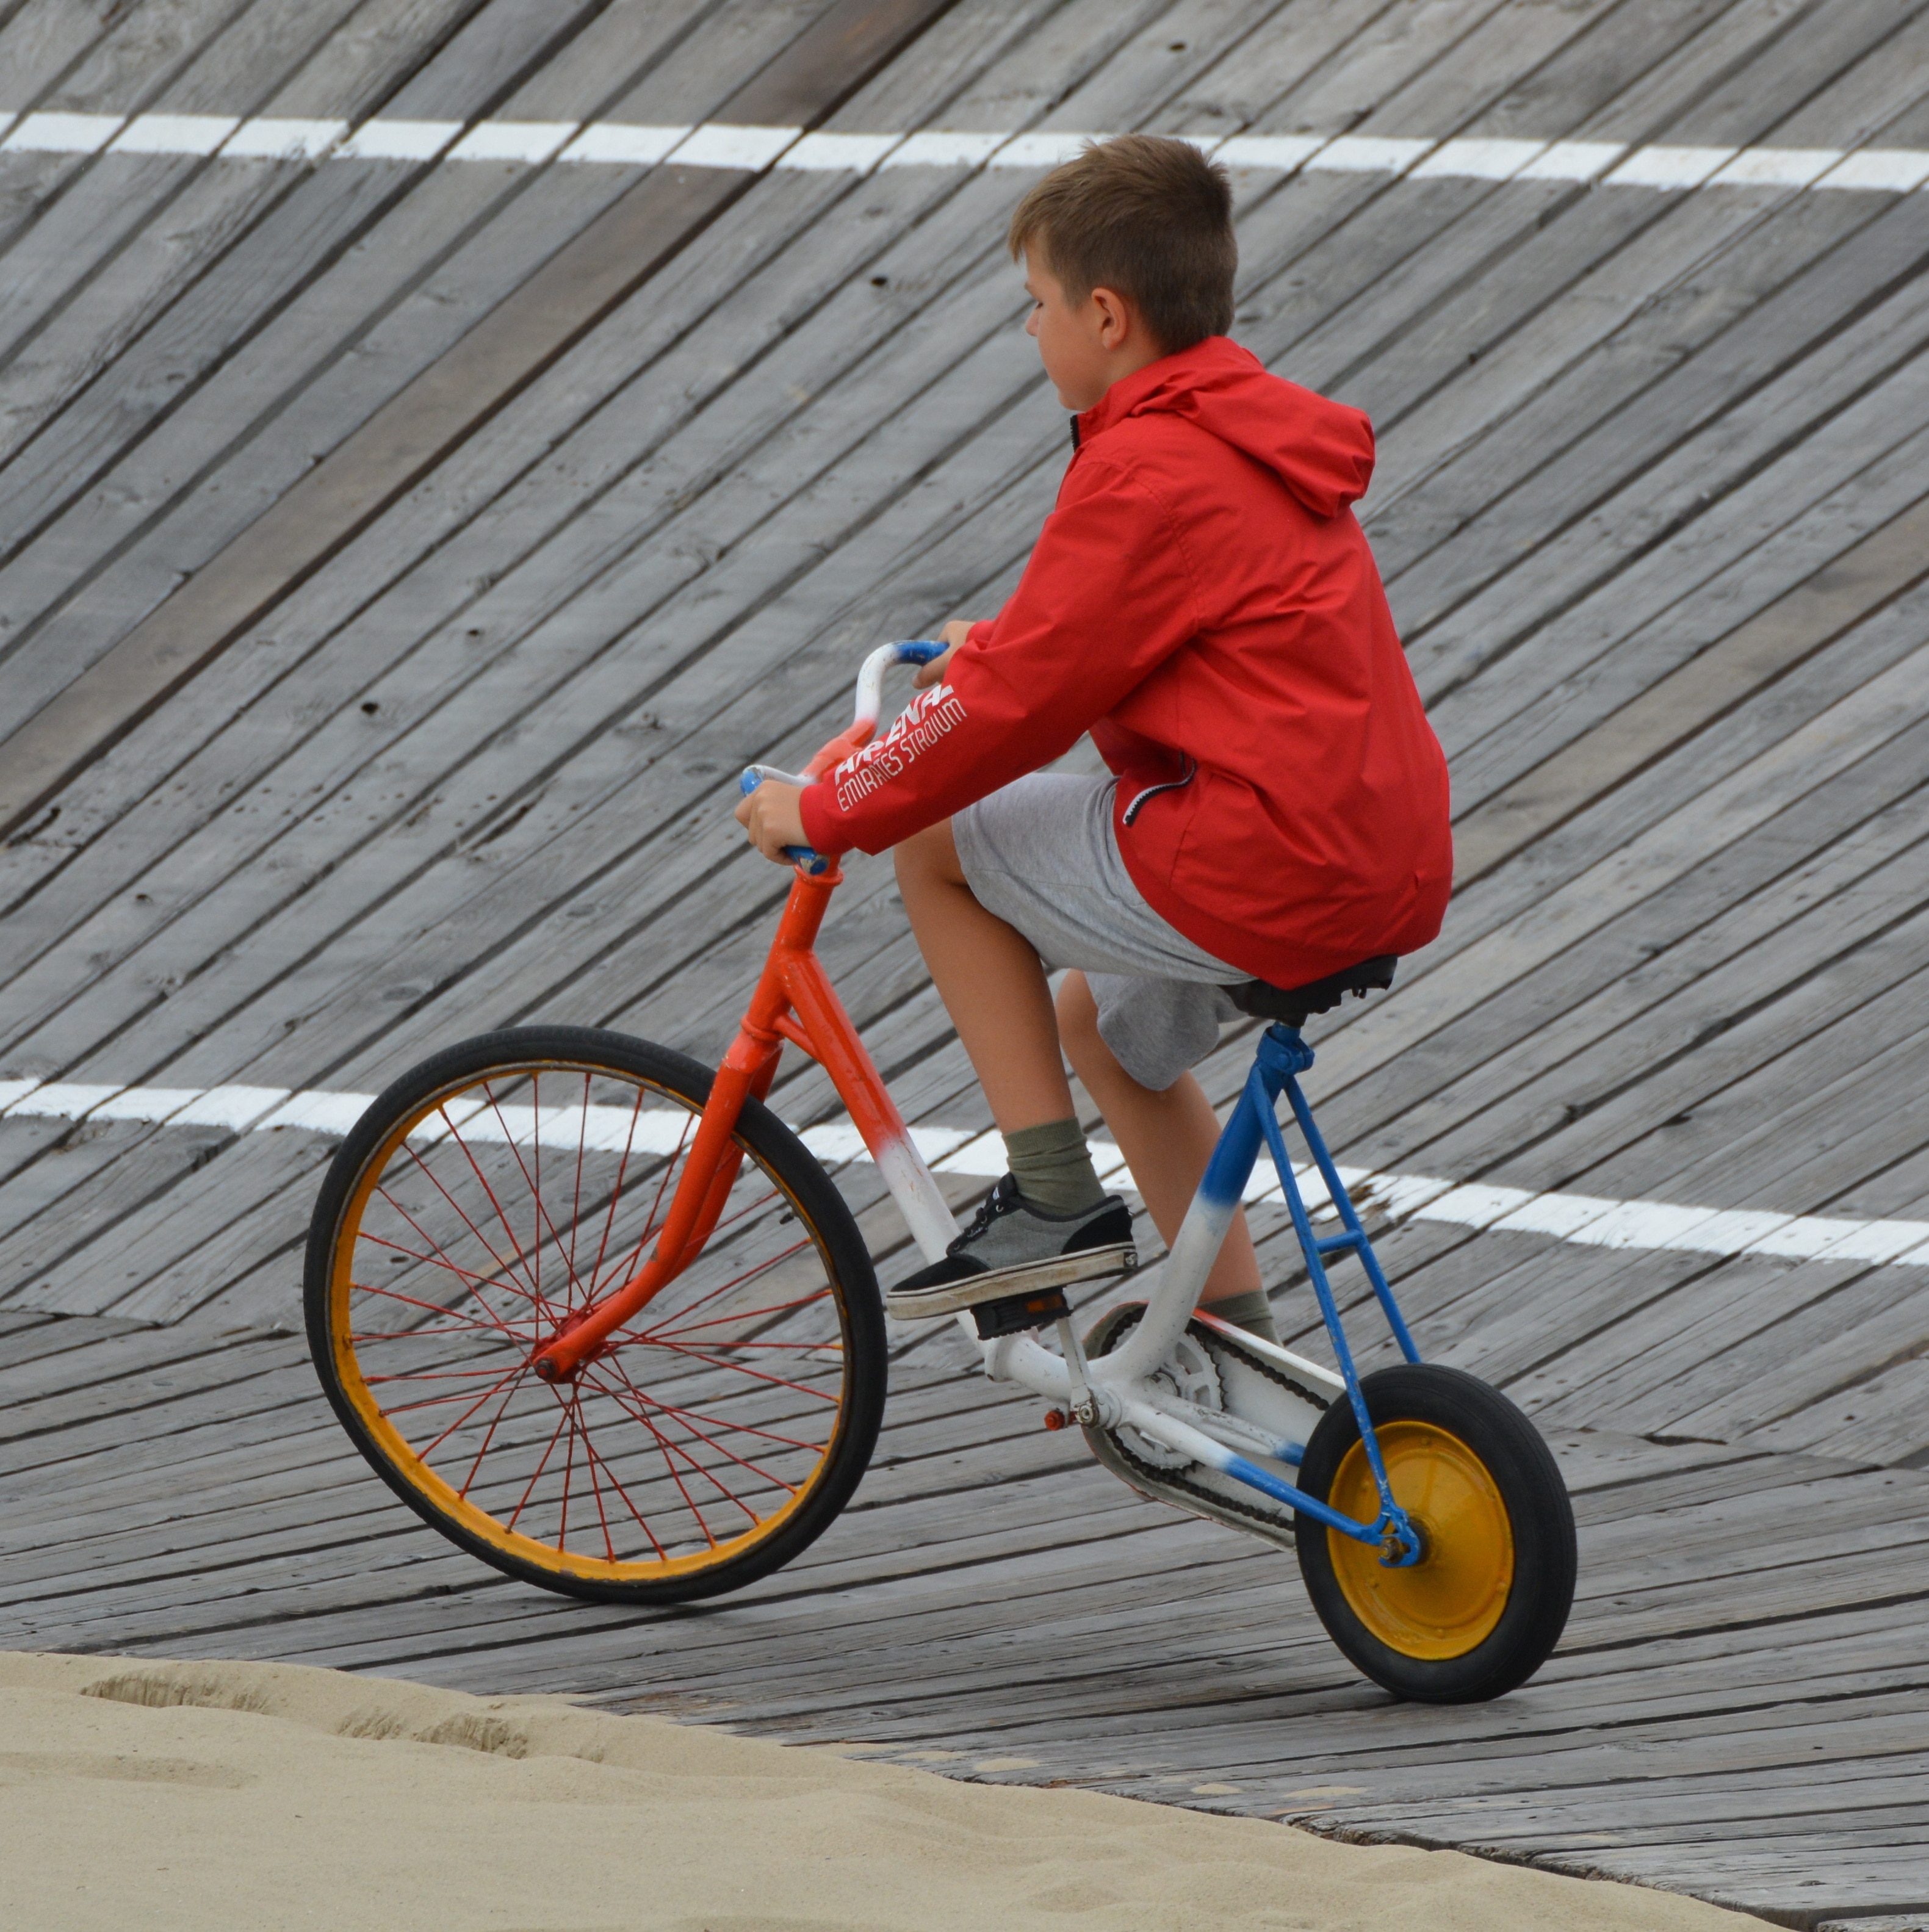 boy's red hooded jacket riding on bicycle at daytime